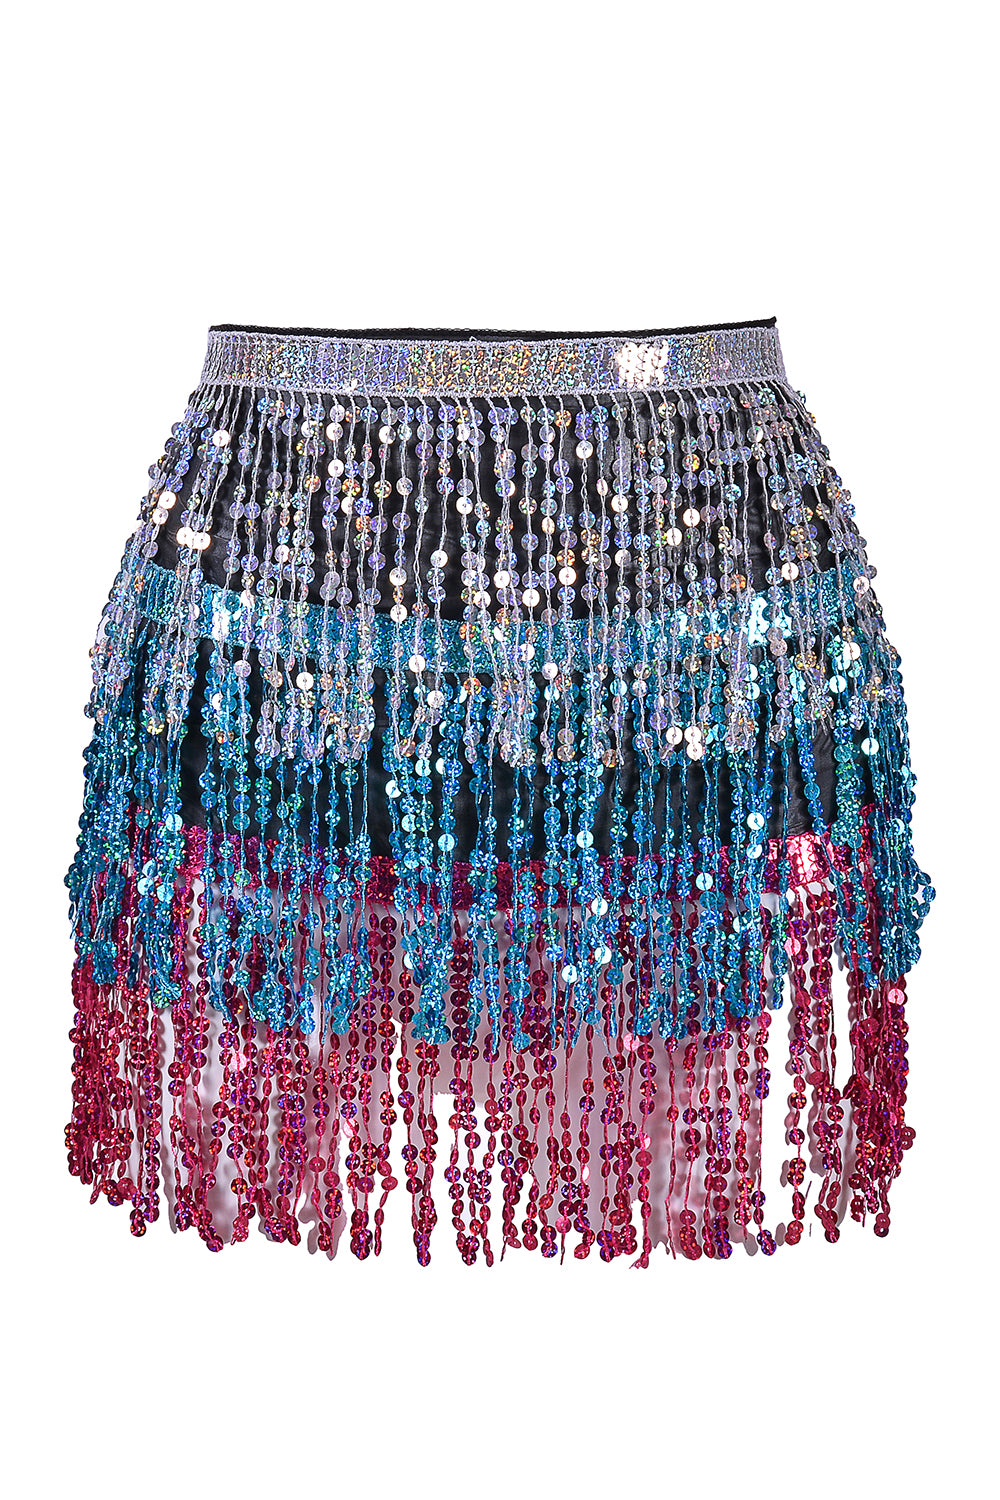 Holographic Tassel Sequin Skirt (8 Colors) – THE LUMi SHOP